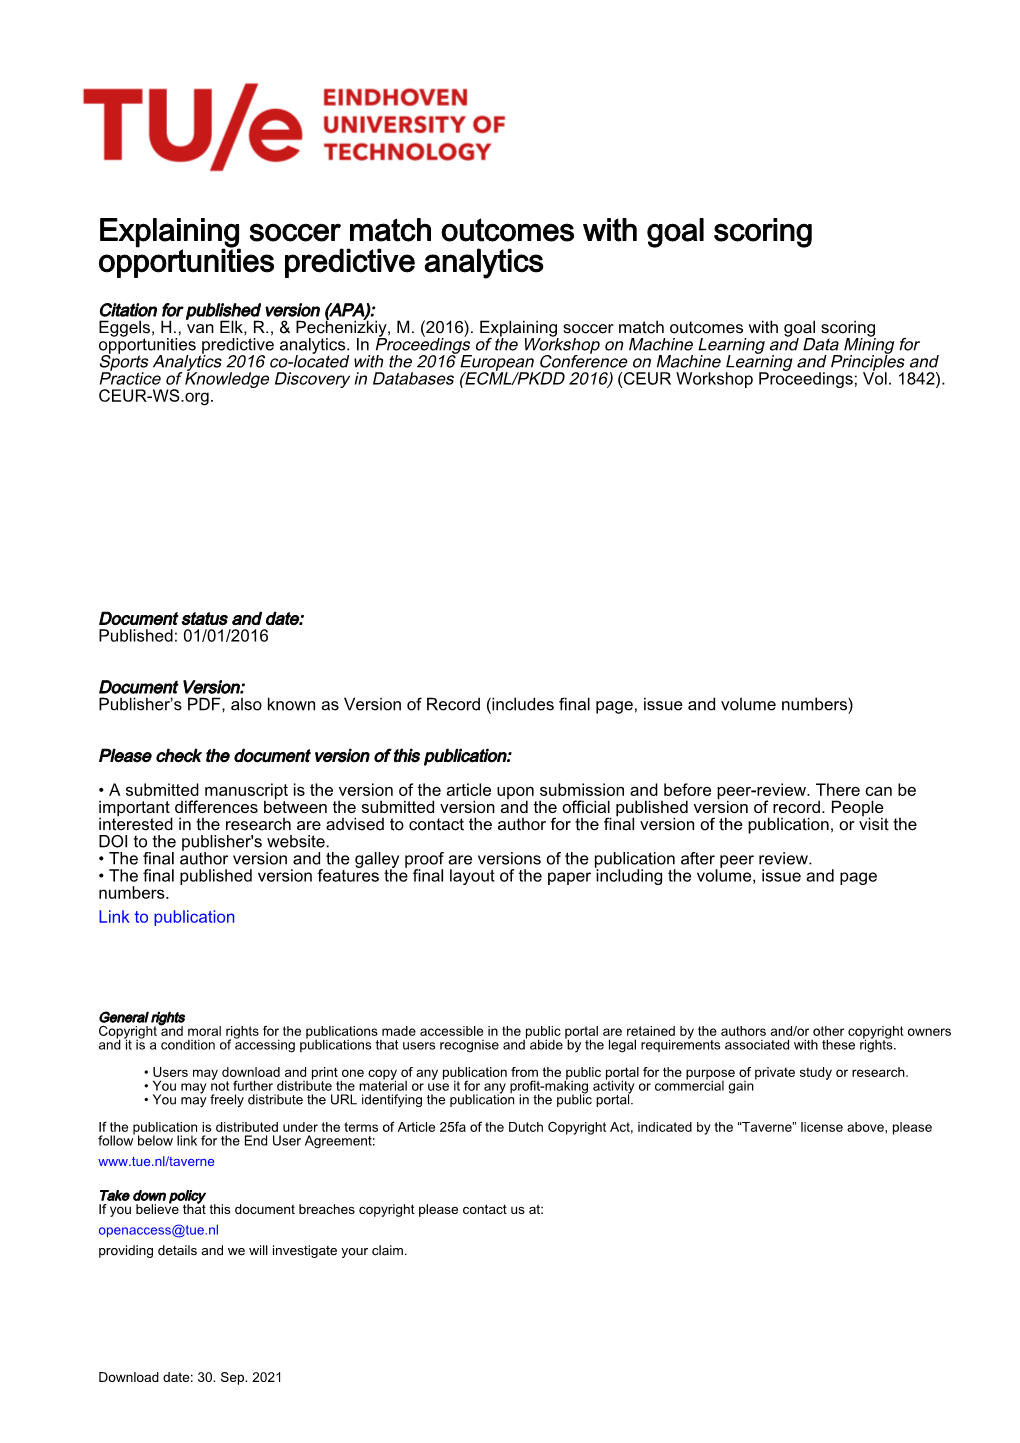 Explaining Soccer Match Outcomes with Goal Scoring Opportunities Predictive Analytics